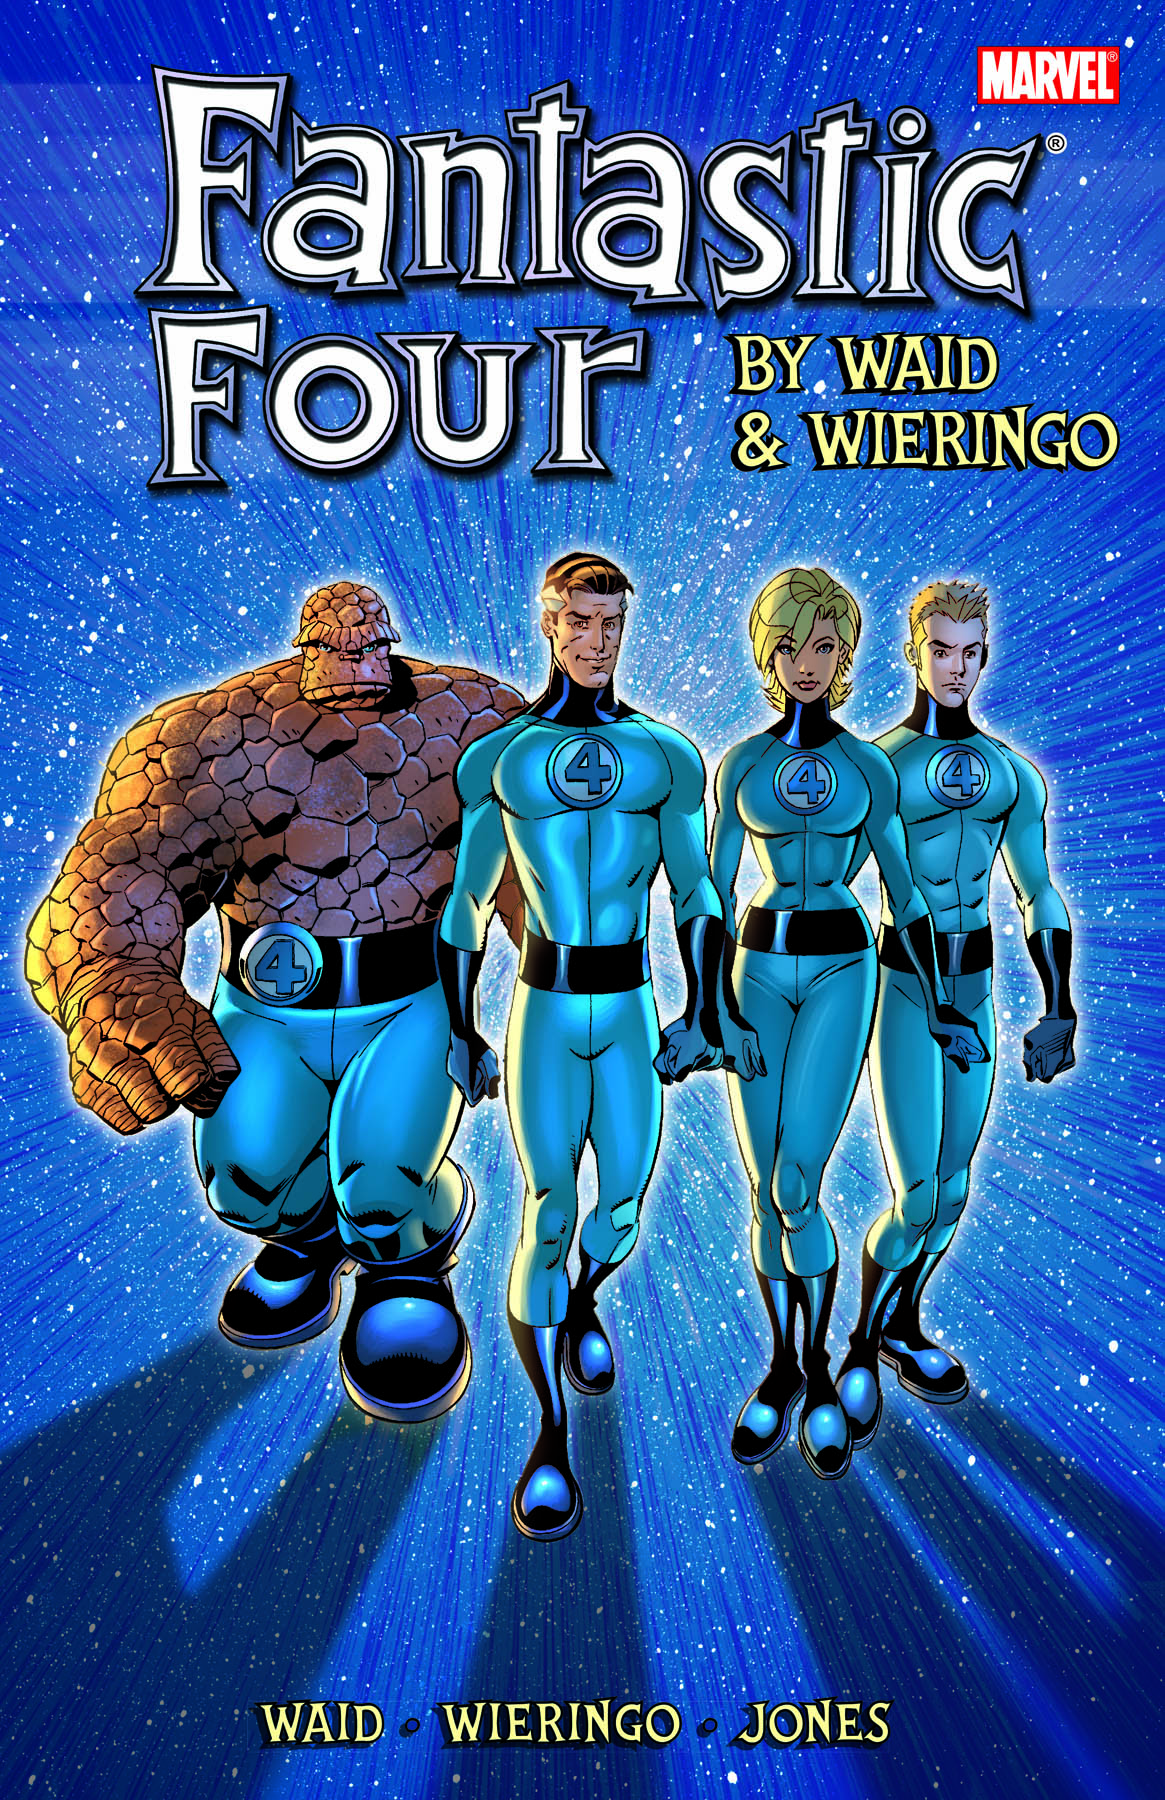 Fantastic Four by Waid & Wieringo Ultimate Collection Book 2 (Trade Paperback)